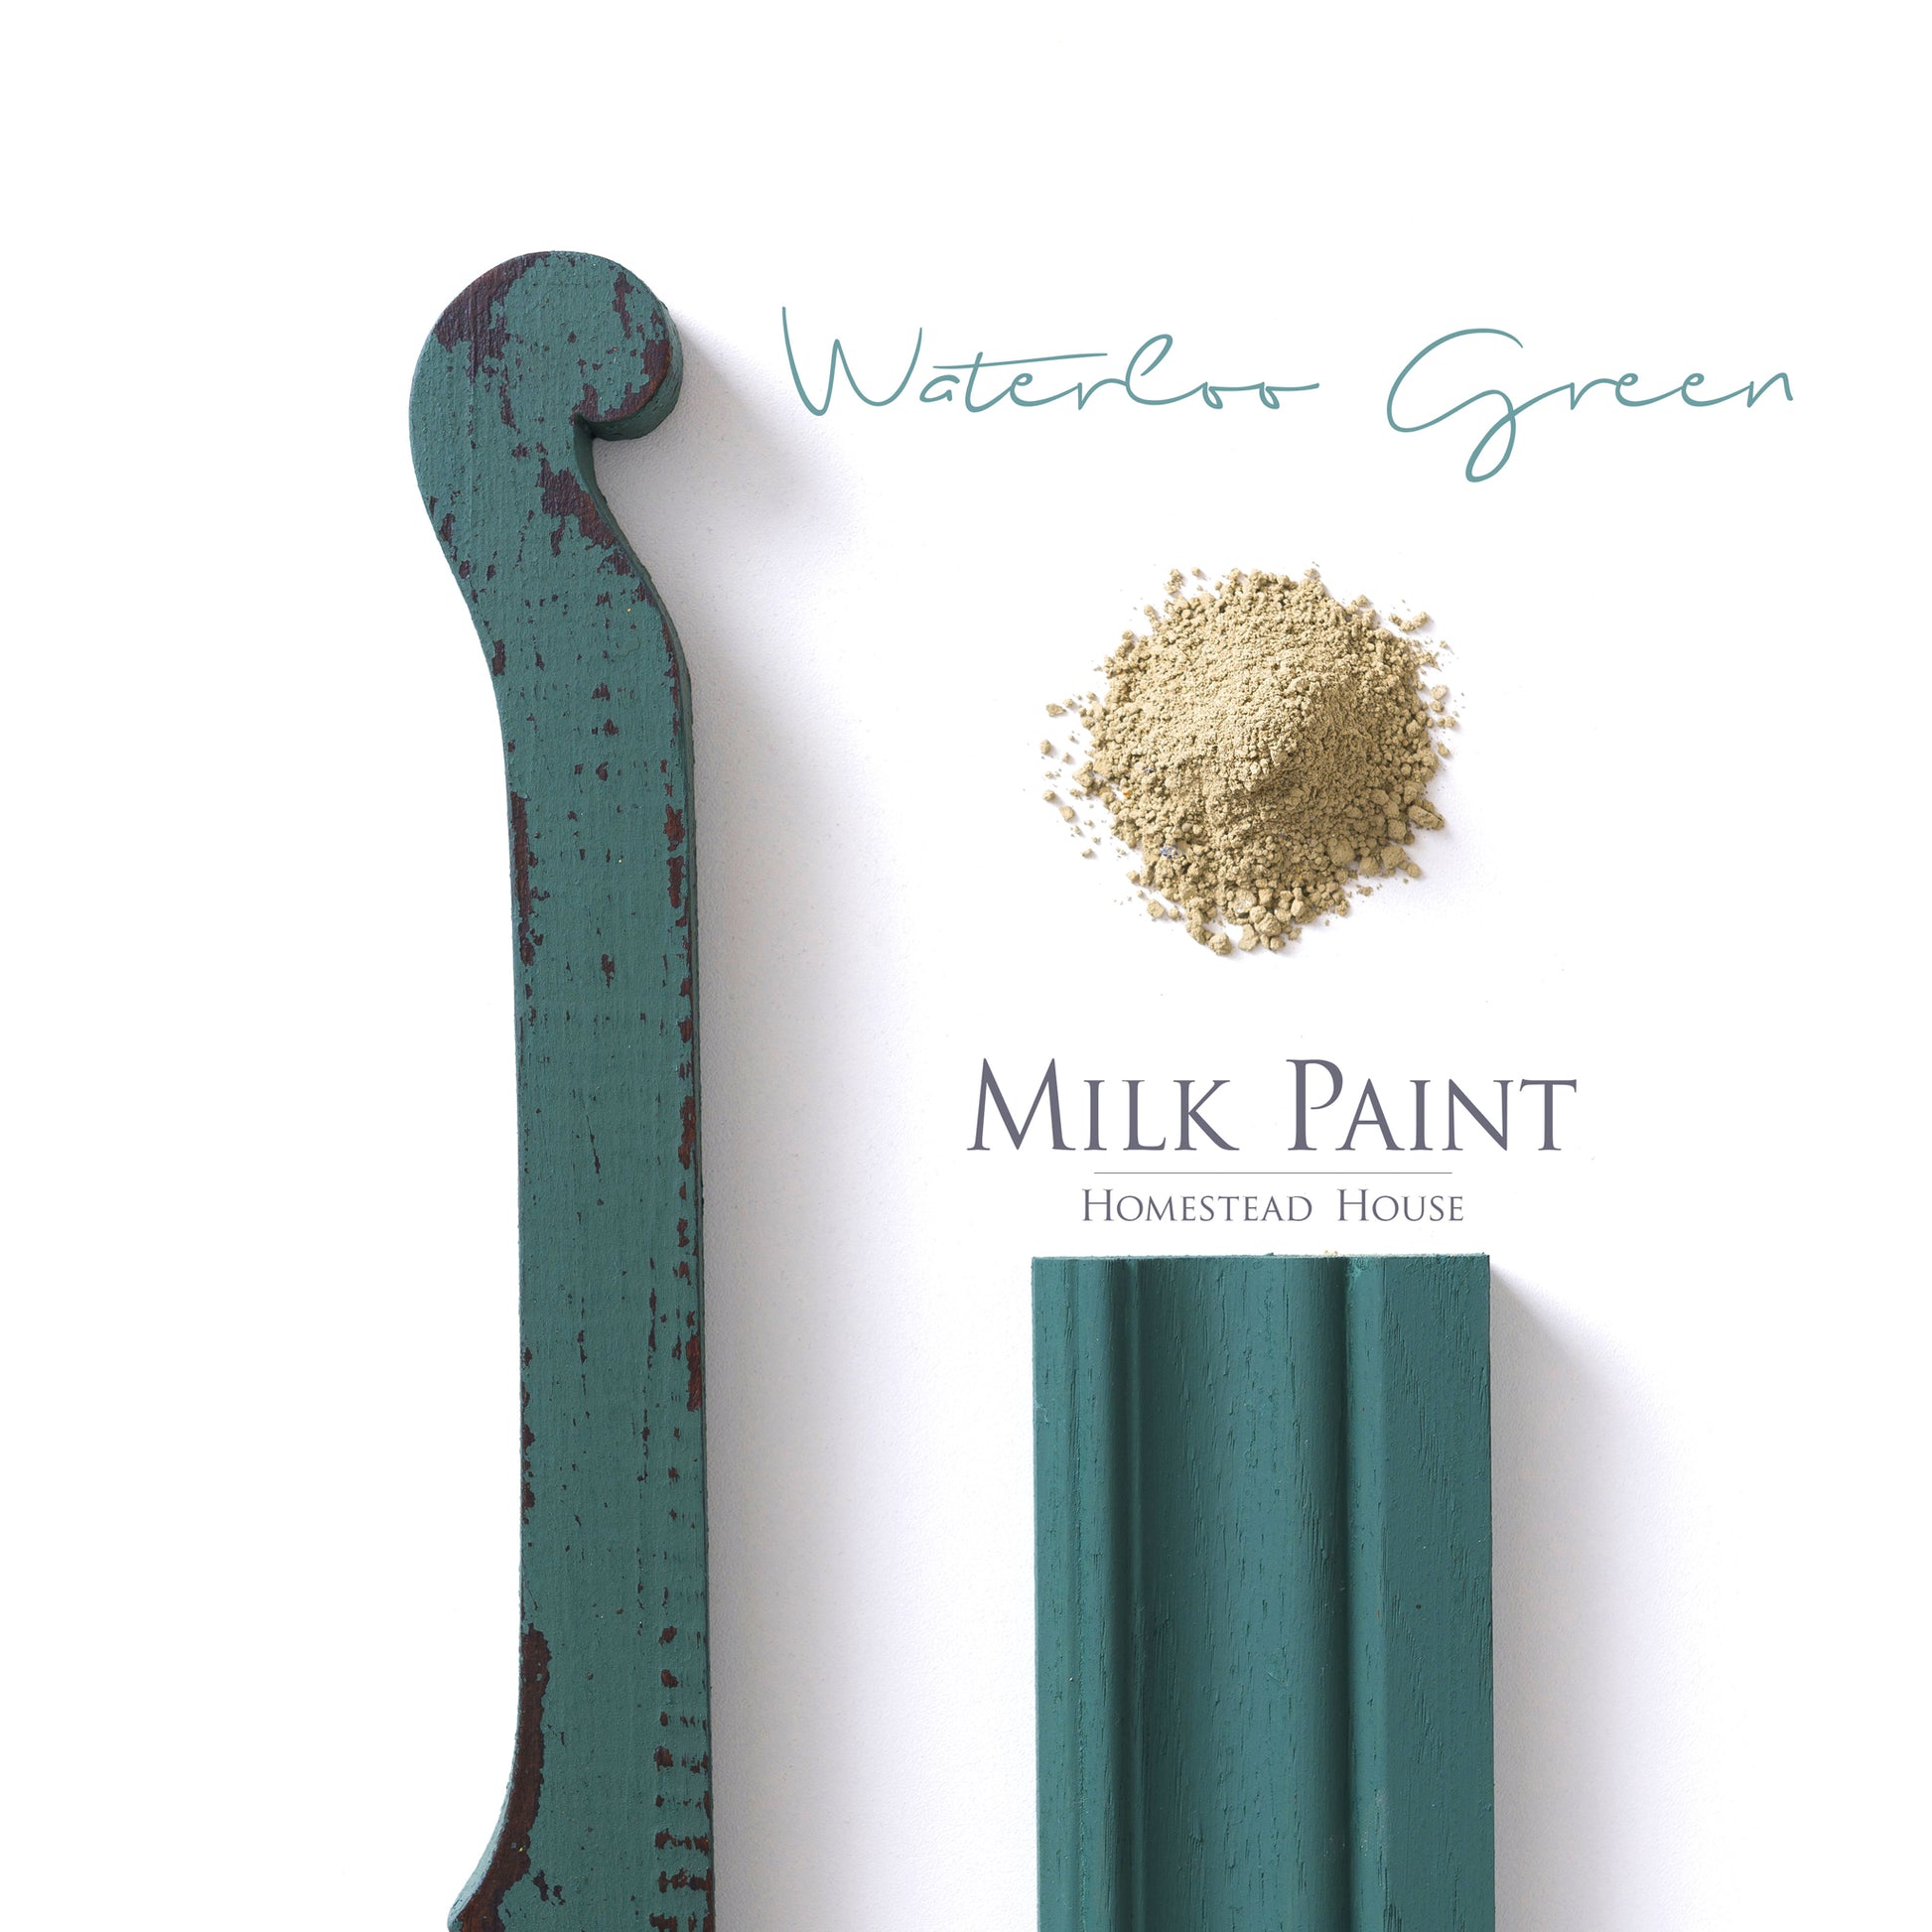 Milk Paint from Homestead House in Waterloo Green - A muted emerald green that has depth. | homesteadhouse.ca